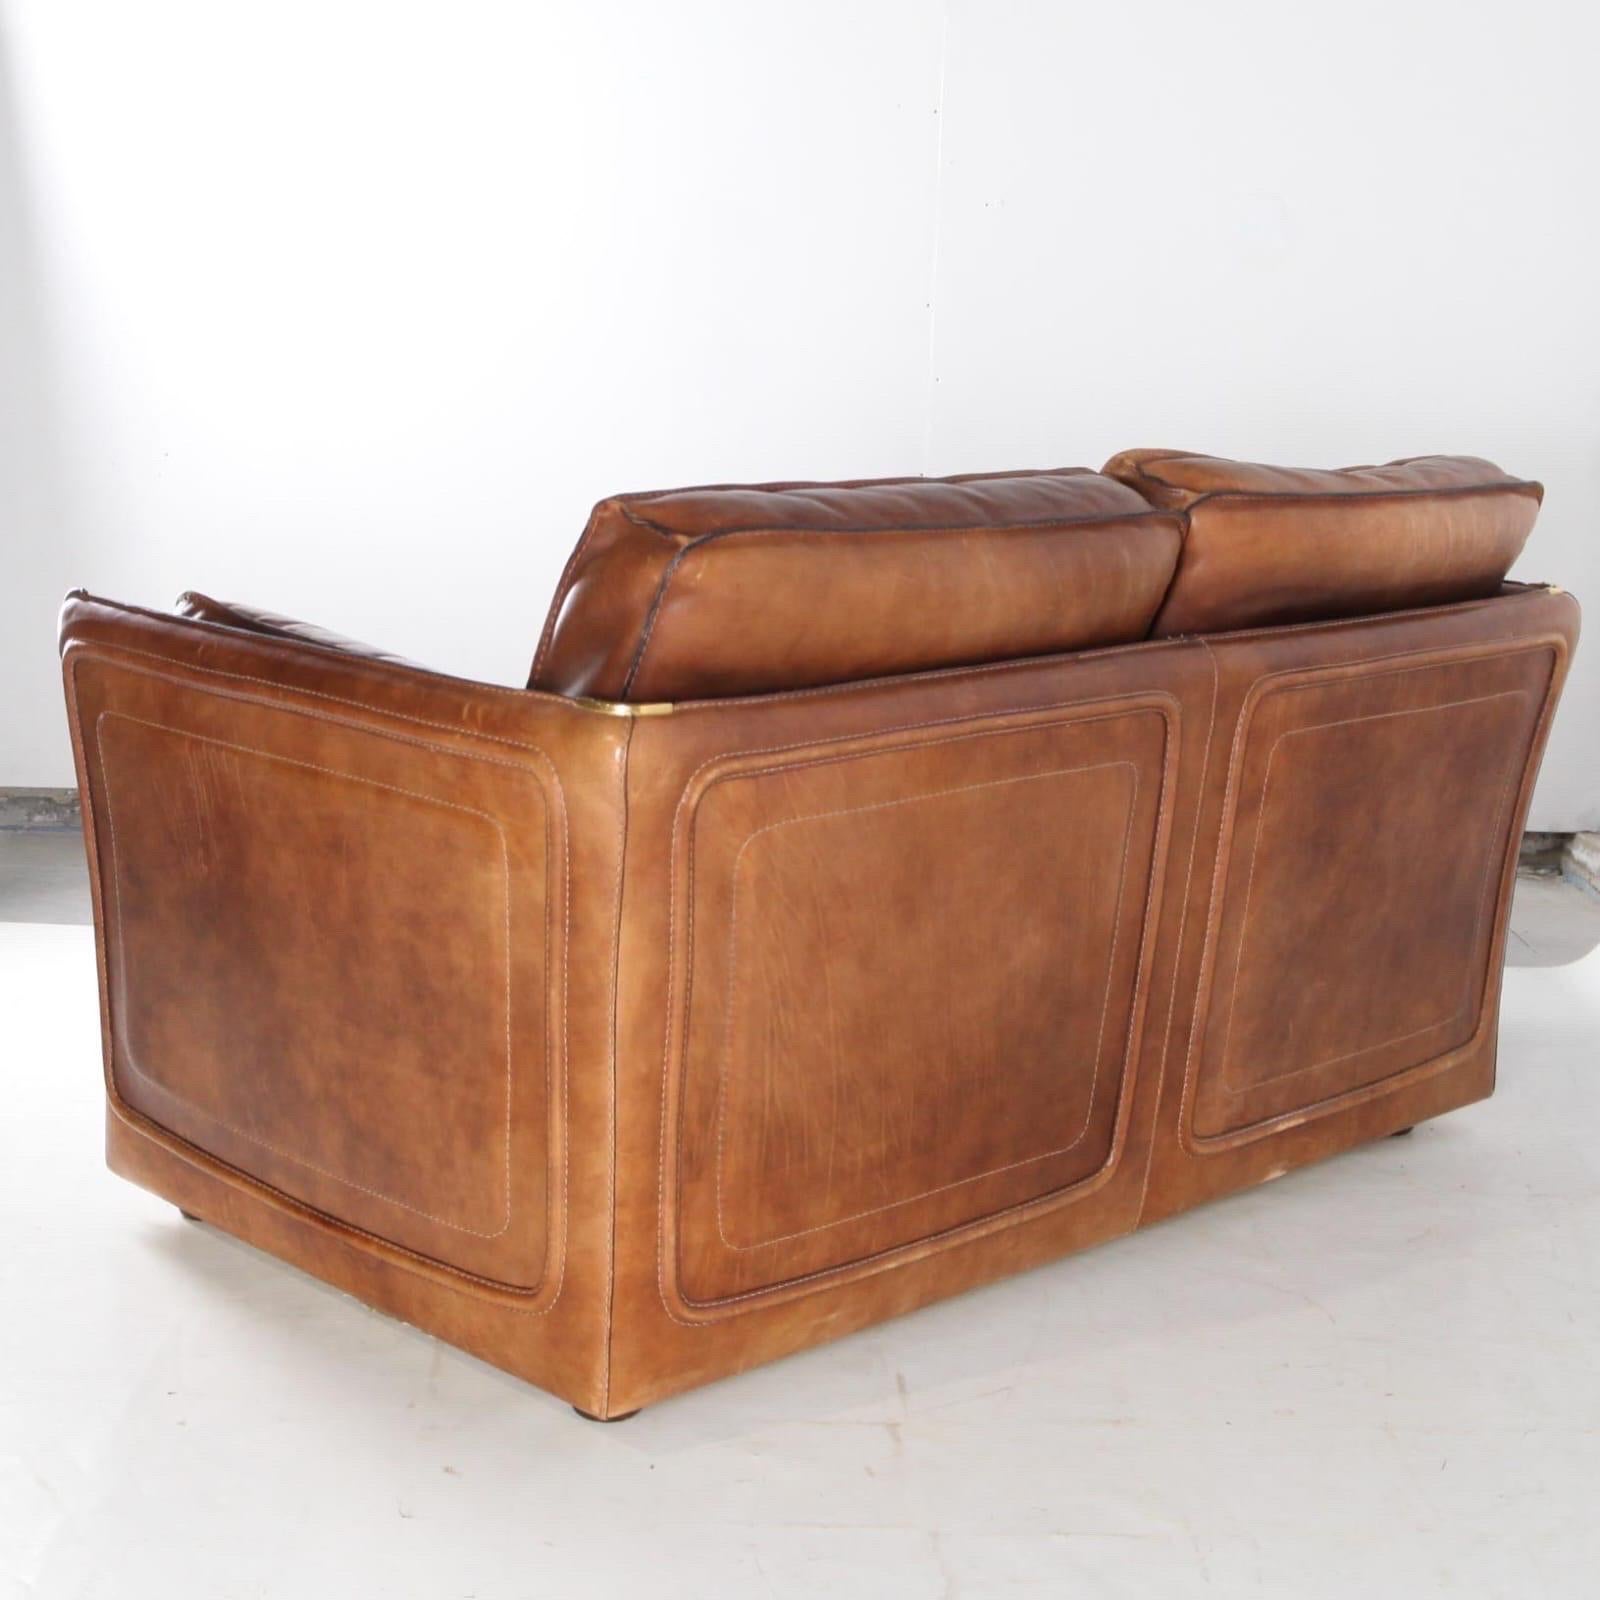 Beautiful Roche Bobois loveseat (2 seaters) from the seventies.
Thick buffalo leather, wooden legs, brass corners, very good condition. 
Comfortable, very good condition and beautiful patina.
Corresponding 3 seaters available too on this site. 
Pair